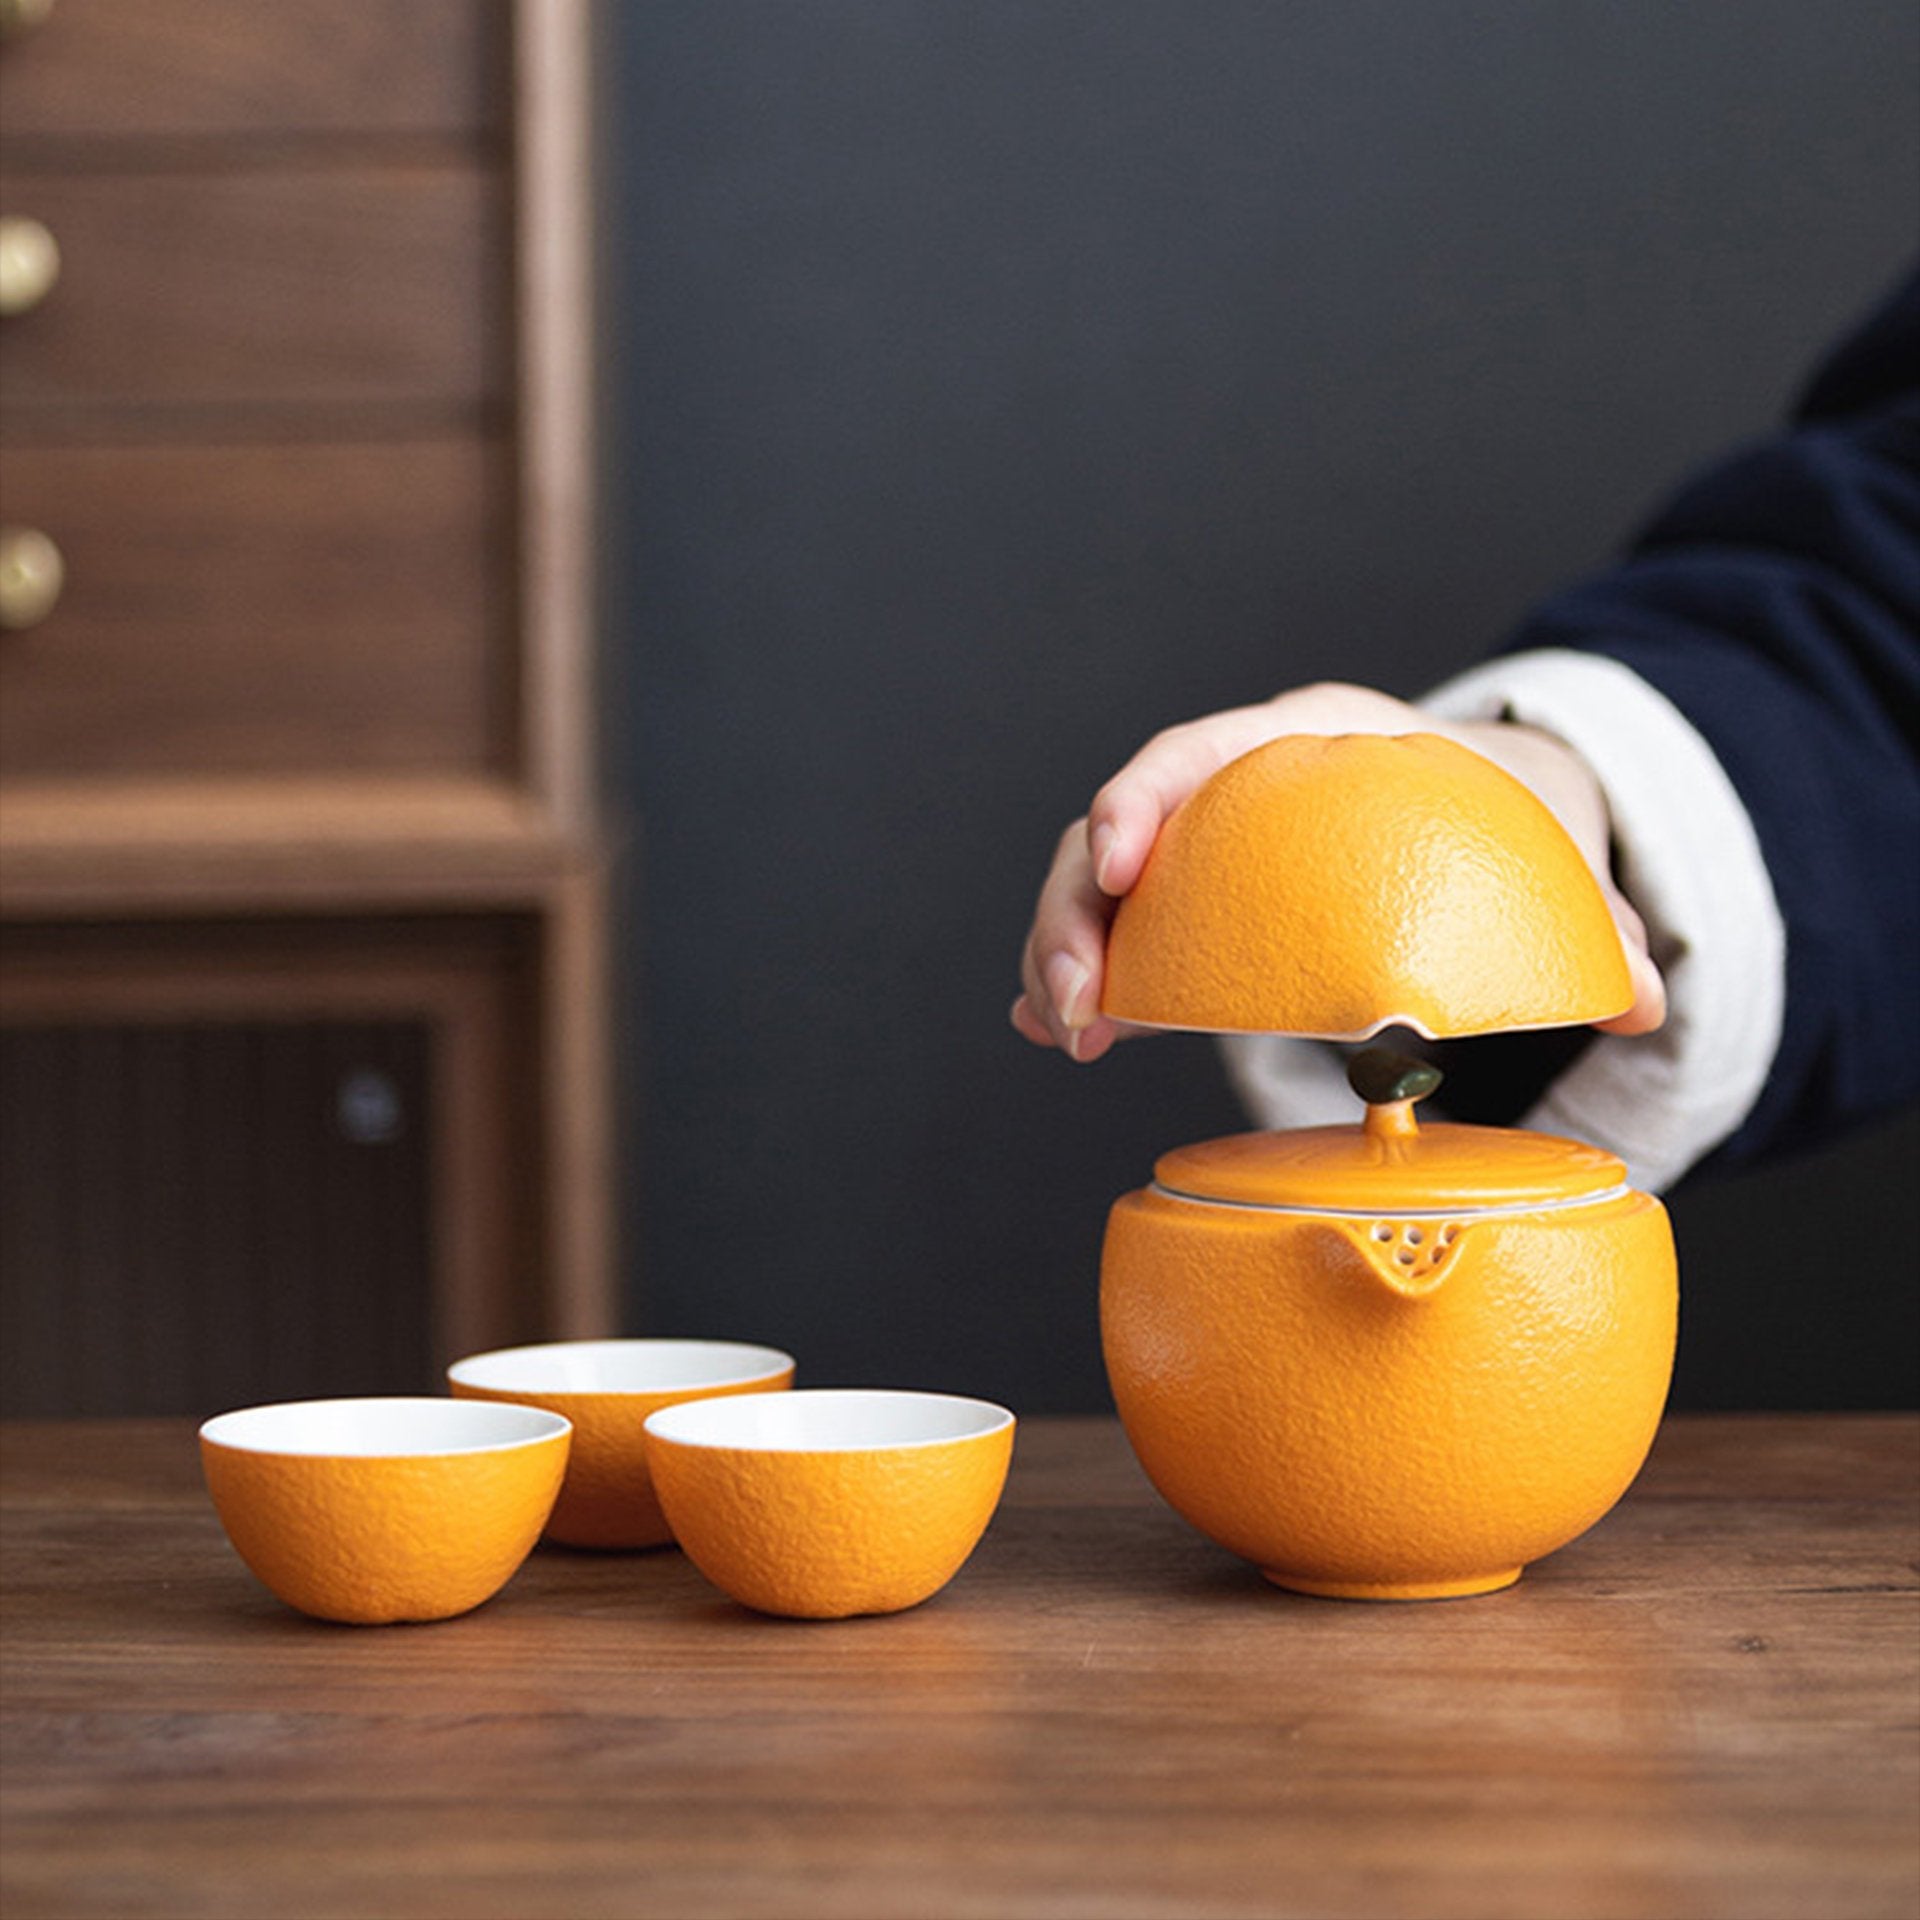 Hand lifting the lid of an orange ceramic teapot with tea cups.